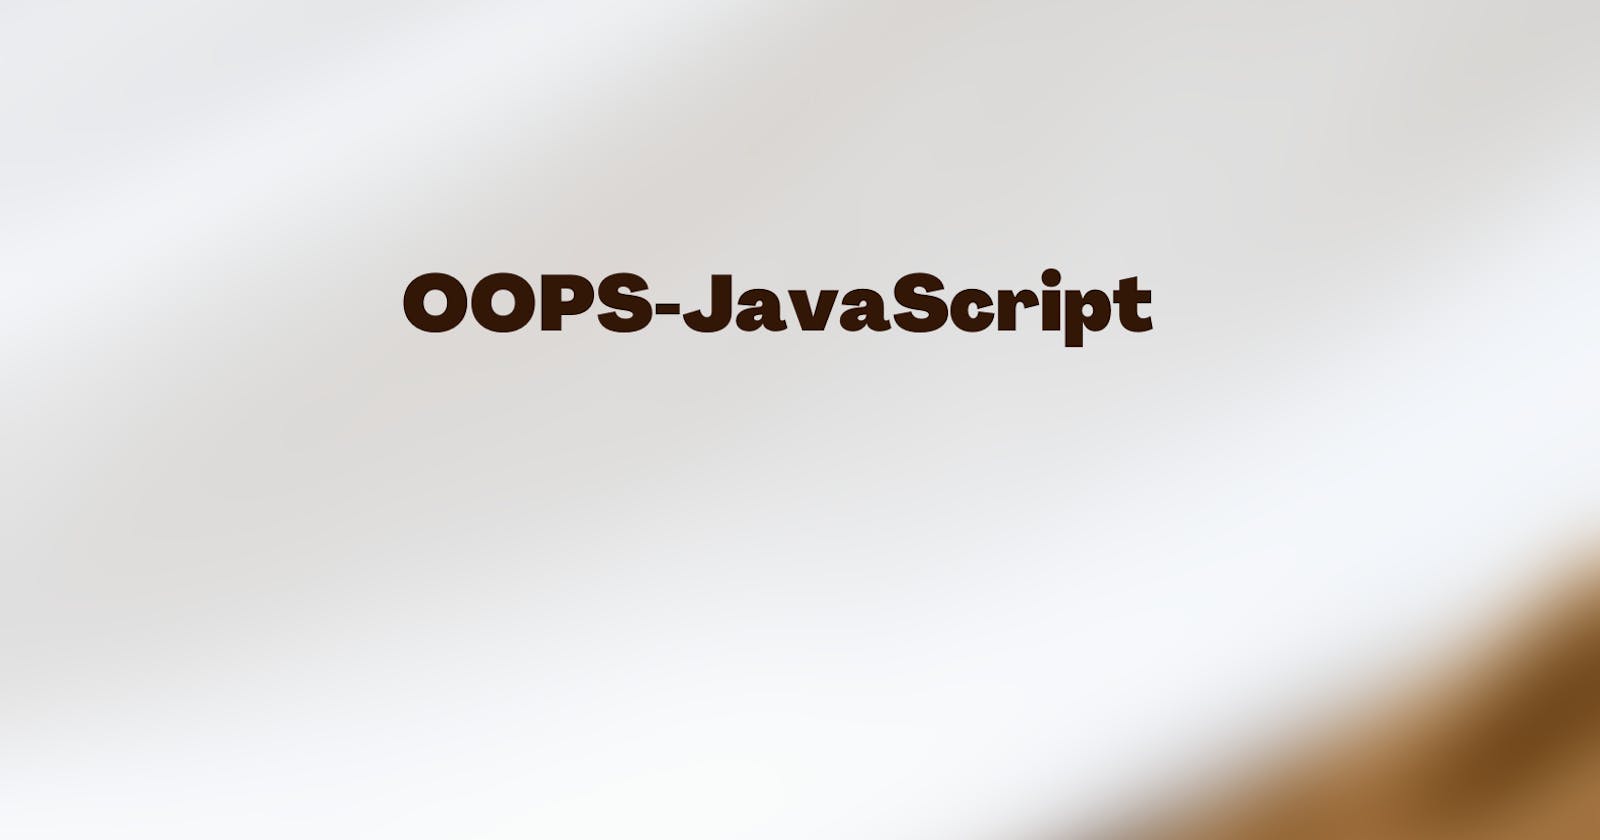 OOPS(Object Oriented Prgramming) in JS :